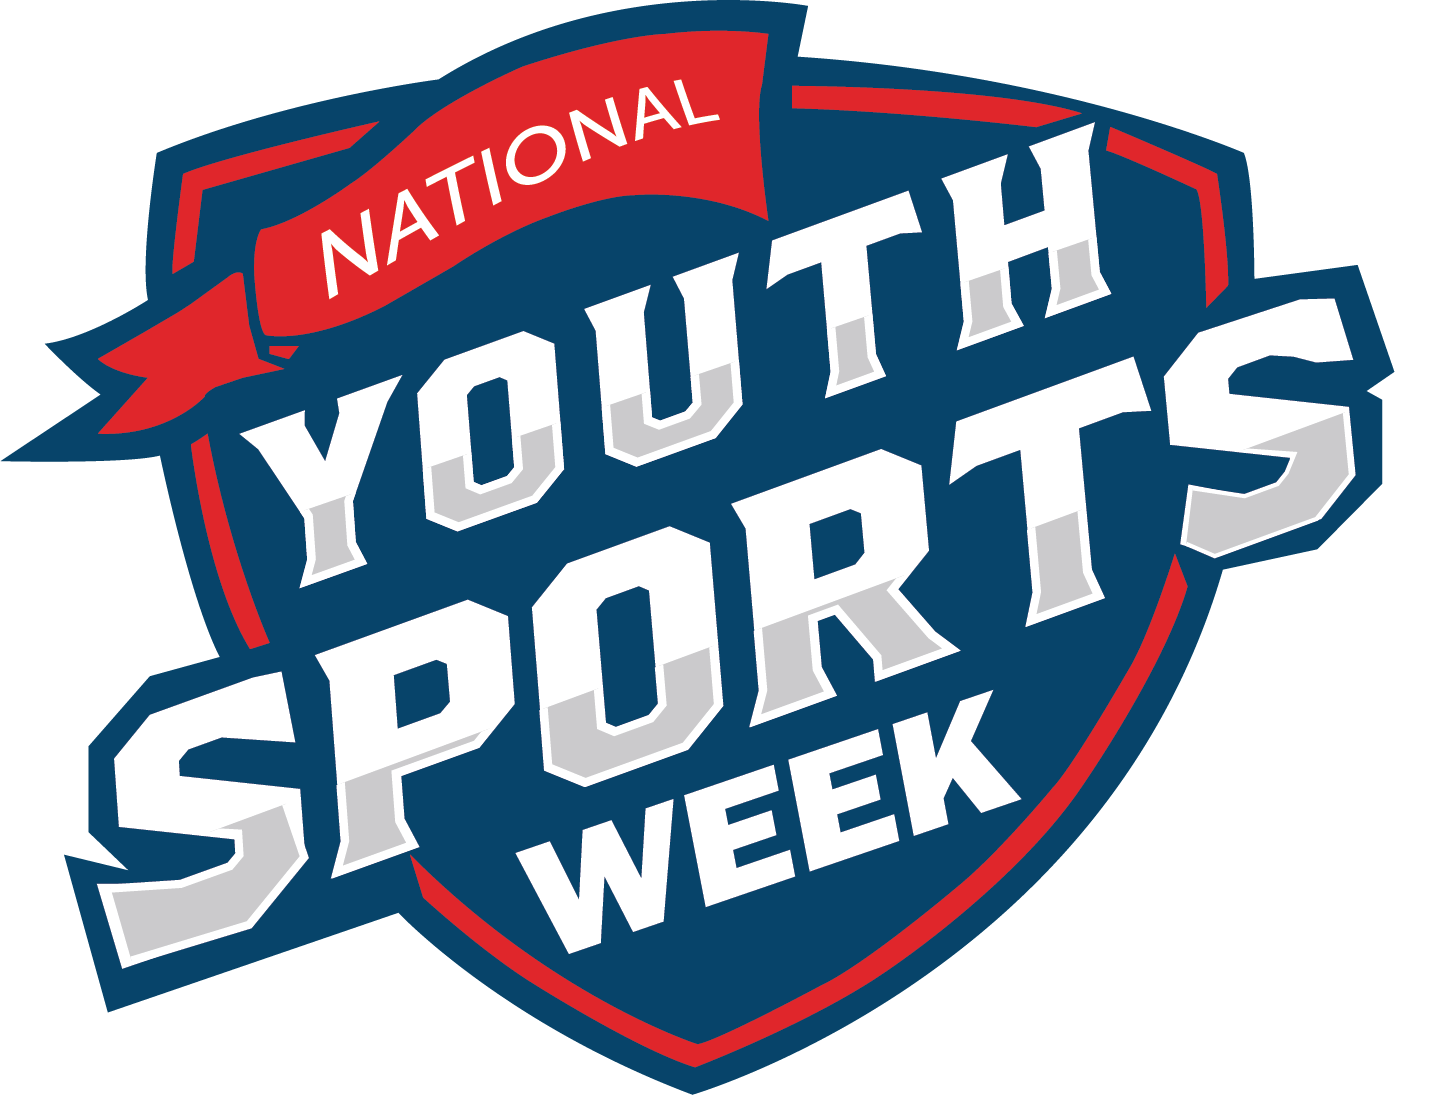 Join us for National Youth Sports Week on October 24 -29, 2022. Our goal is...